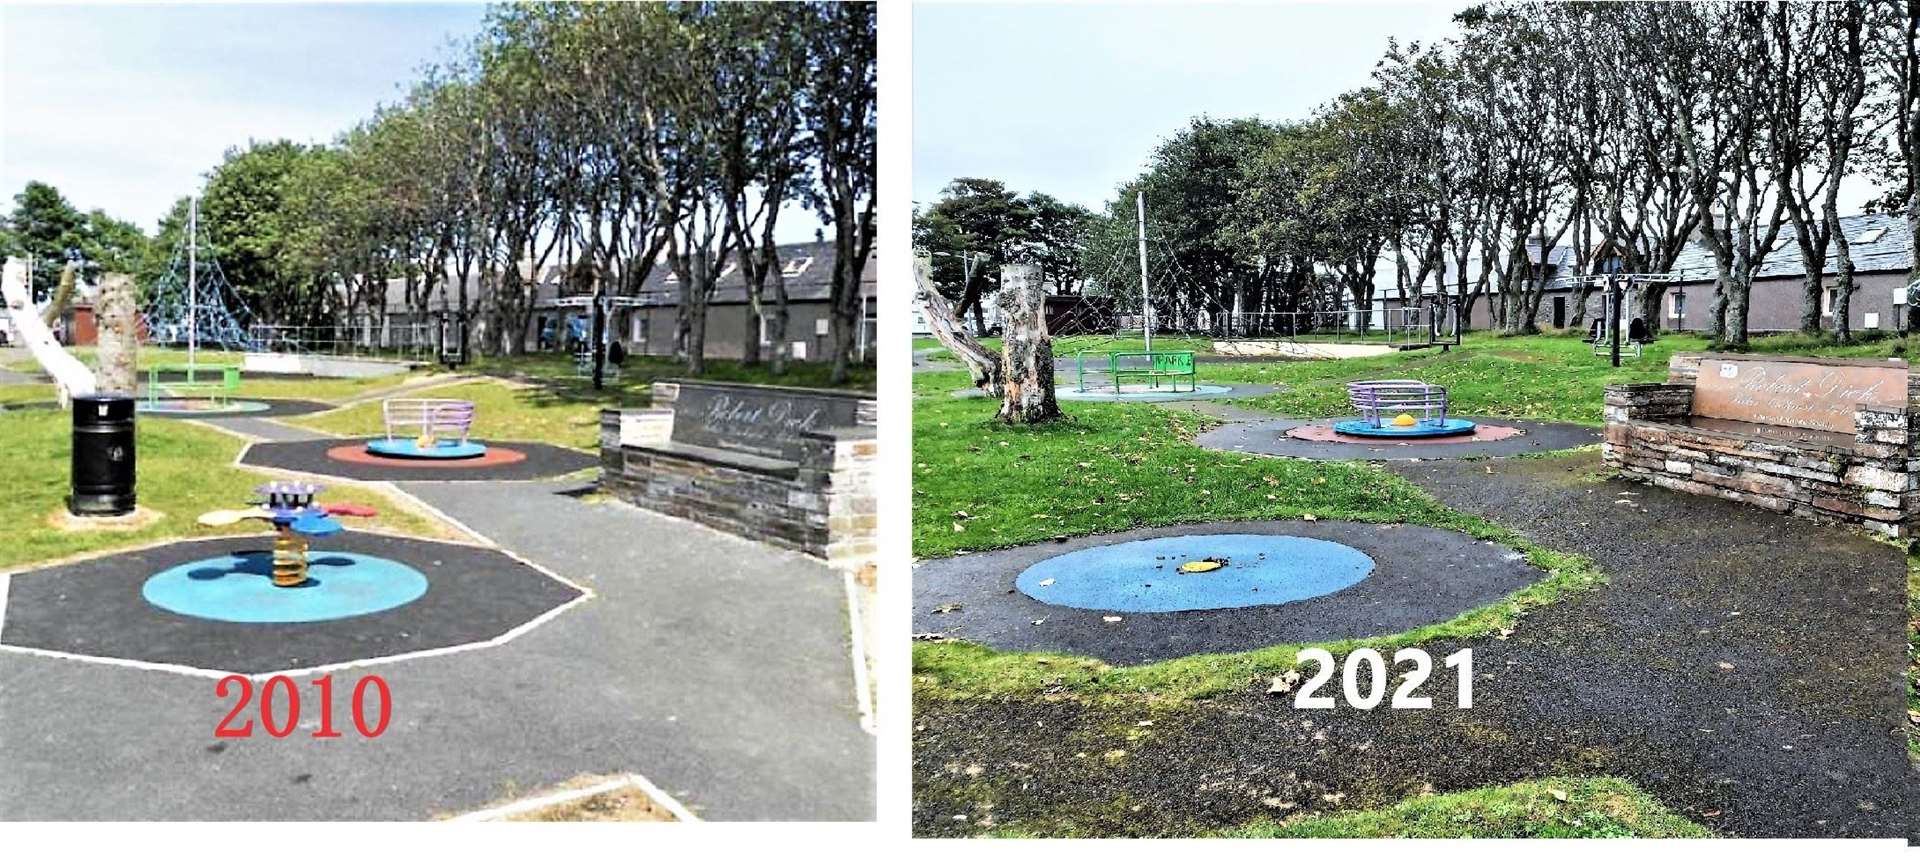 Thurso boating pond play area in 2010 and at present showing how dilapidated it has become.